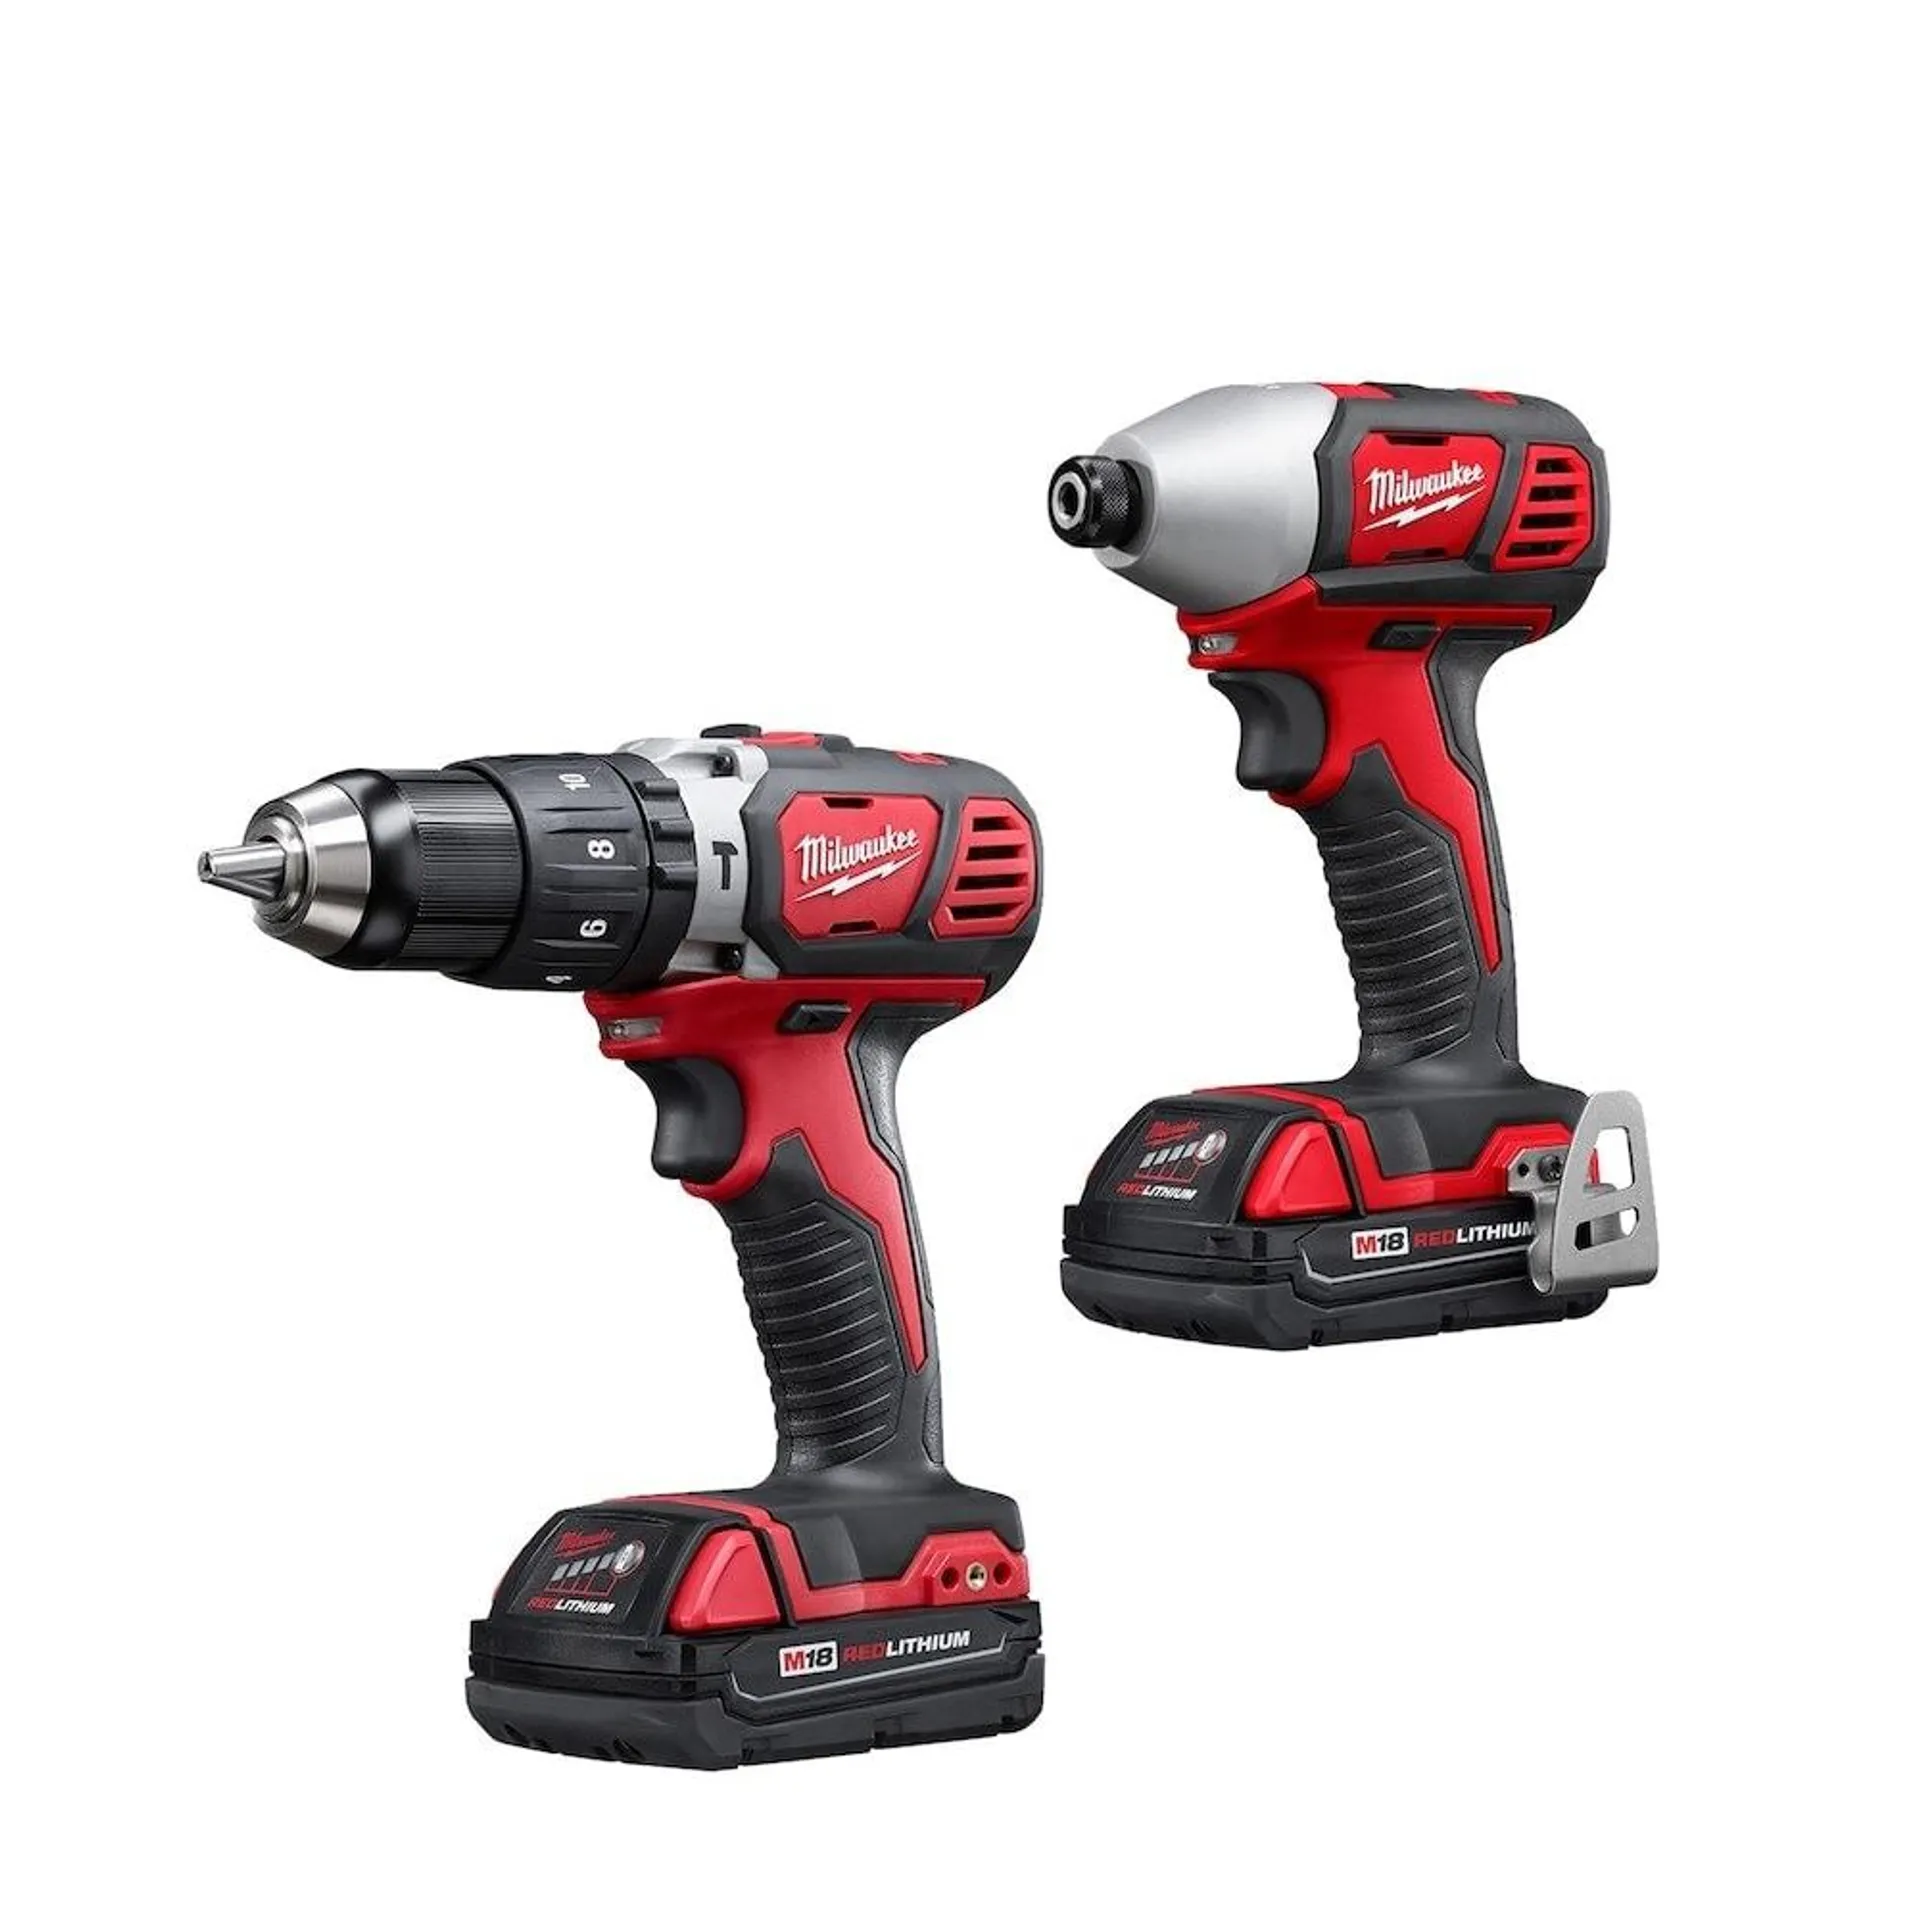 M18 18V Lithium-Ion Cordless Hammer Drill/Impact Driver Combo Kit (2-Tool) w/ (2) 1.5Ah Batteries